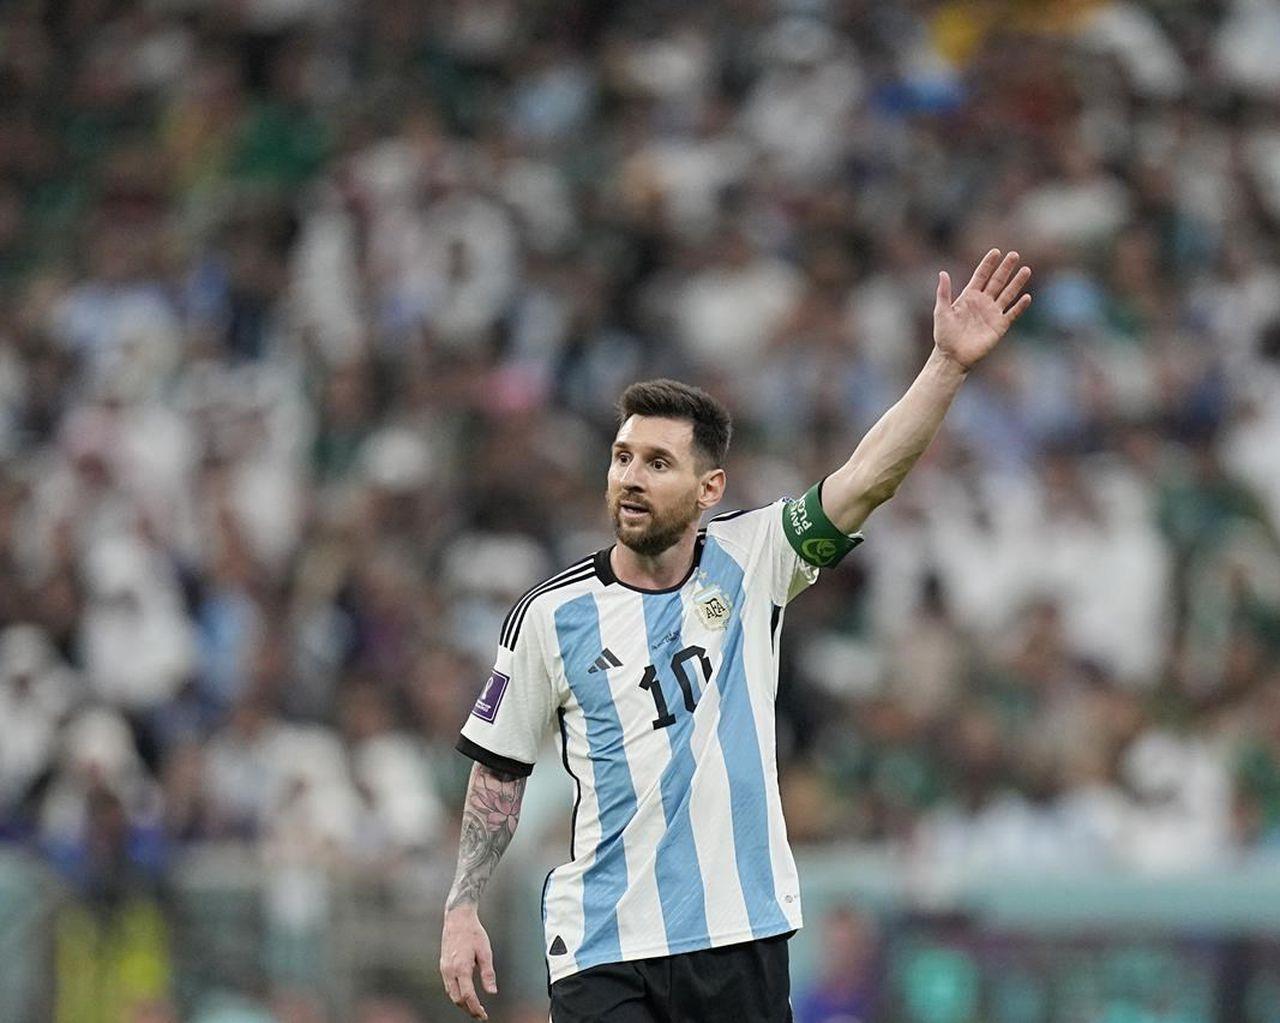 Messi Likened To Skiing Great Alberto Tomba By Poland Coach The Star